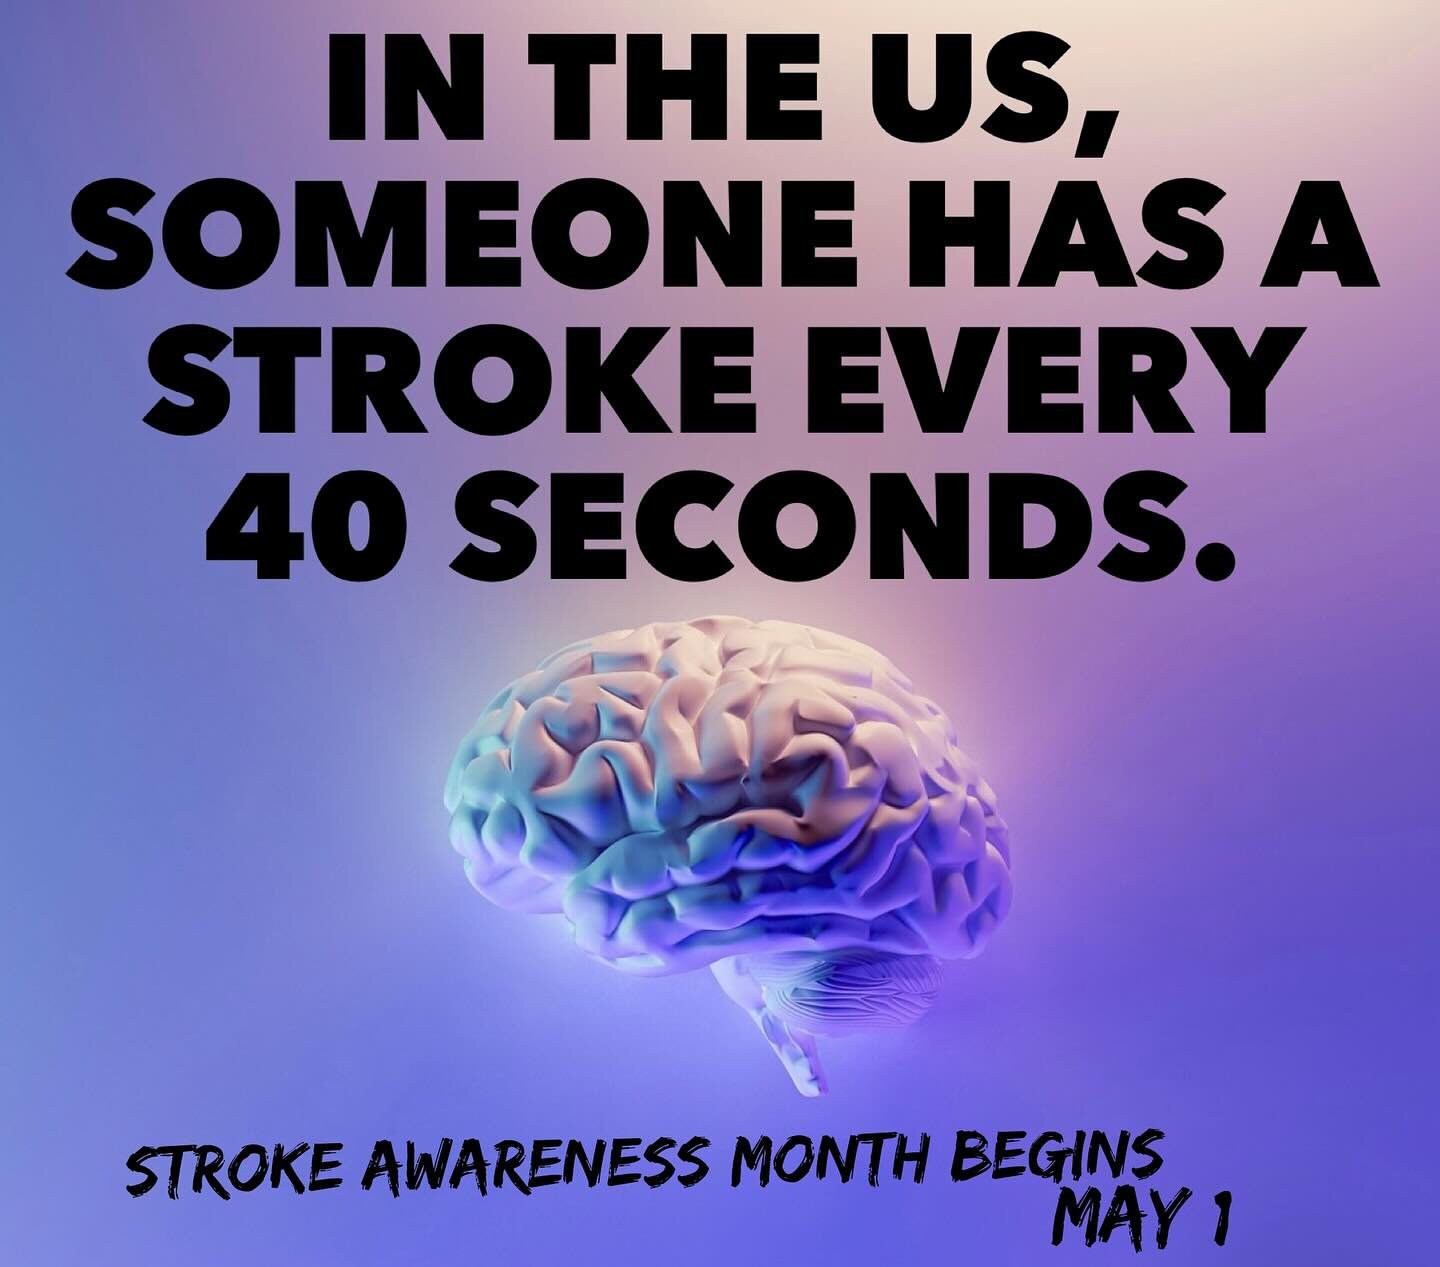 #StrokeAwarenessMonth begins May 1! 

➡️ Did you know that in the US someone has a stroke every 40 seconds? Nearly 800,000 people will have a stroke this year. Stroke can happen to anyone, at any age, at any time.

Image description: black text on a 